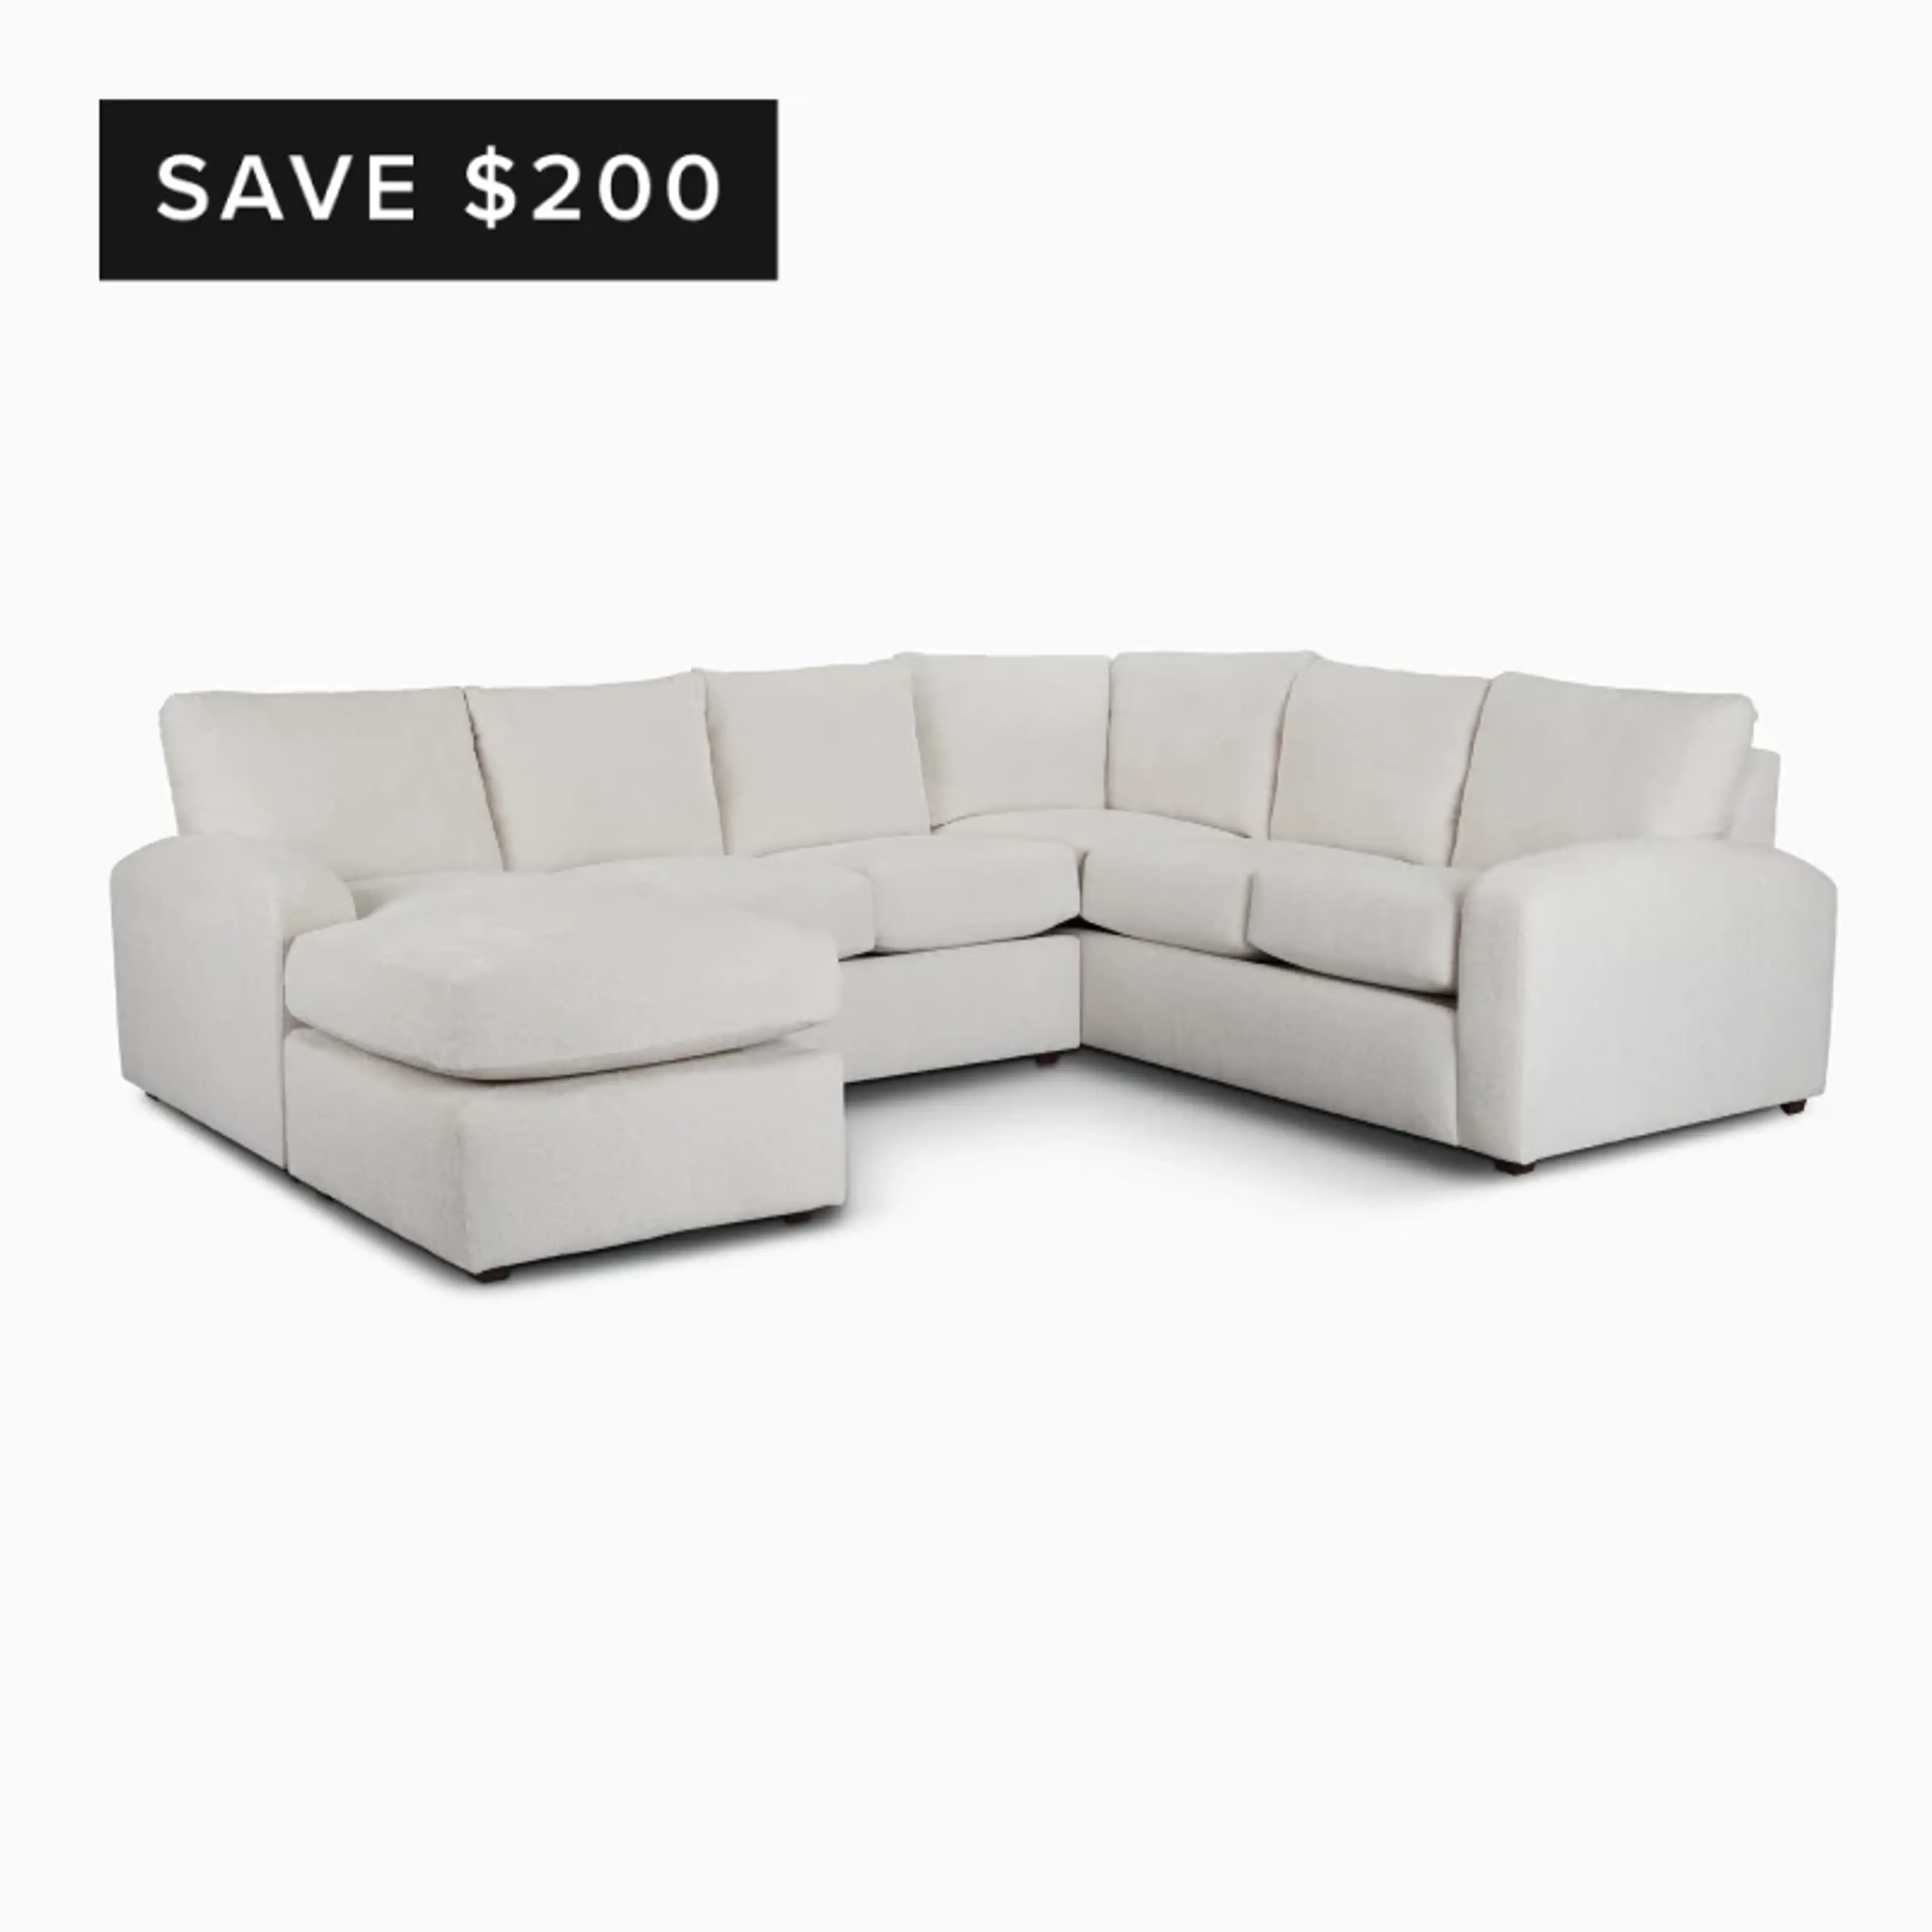 Colby Sectional